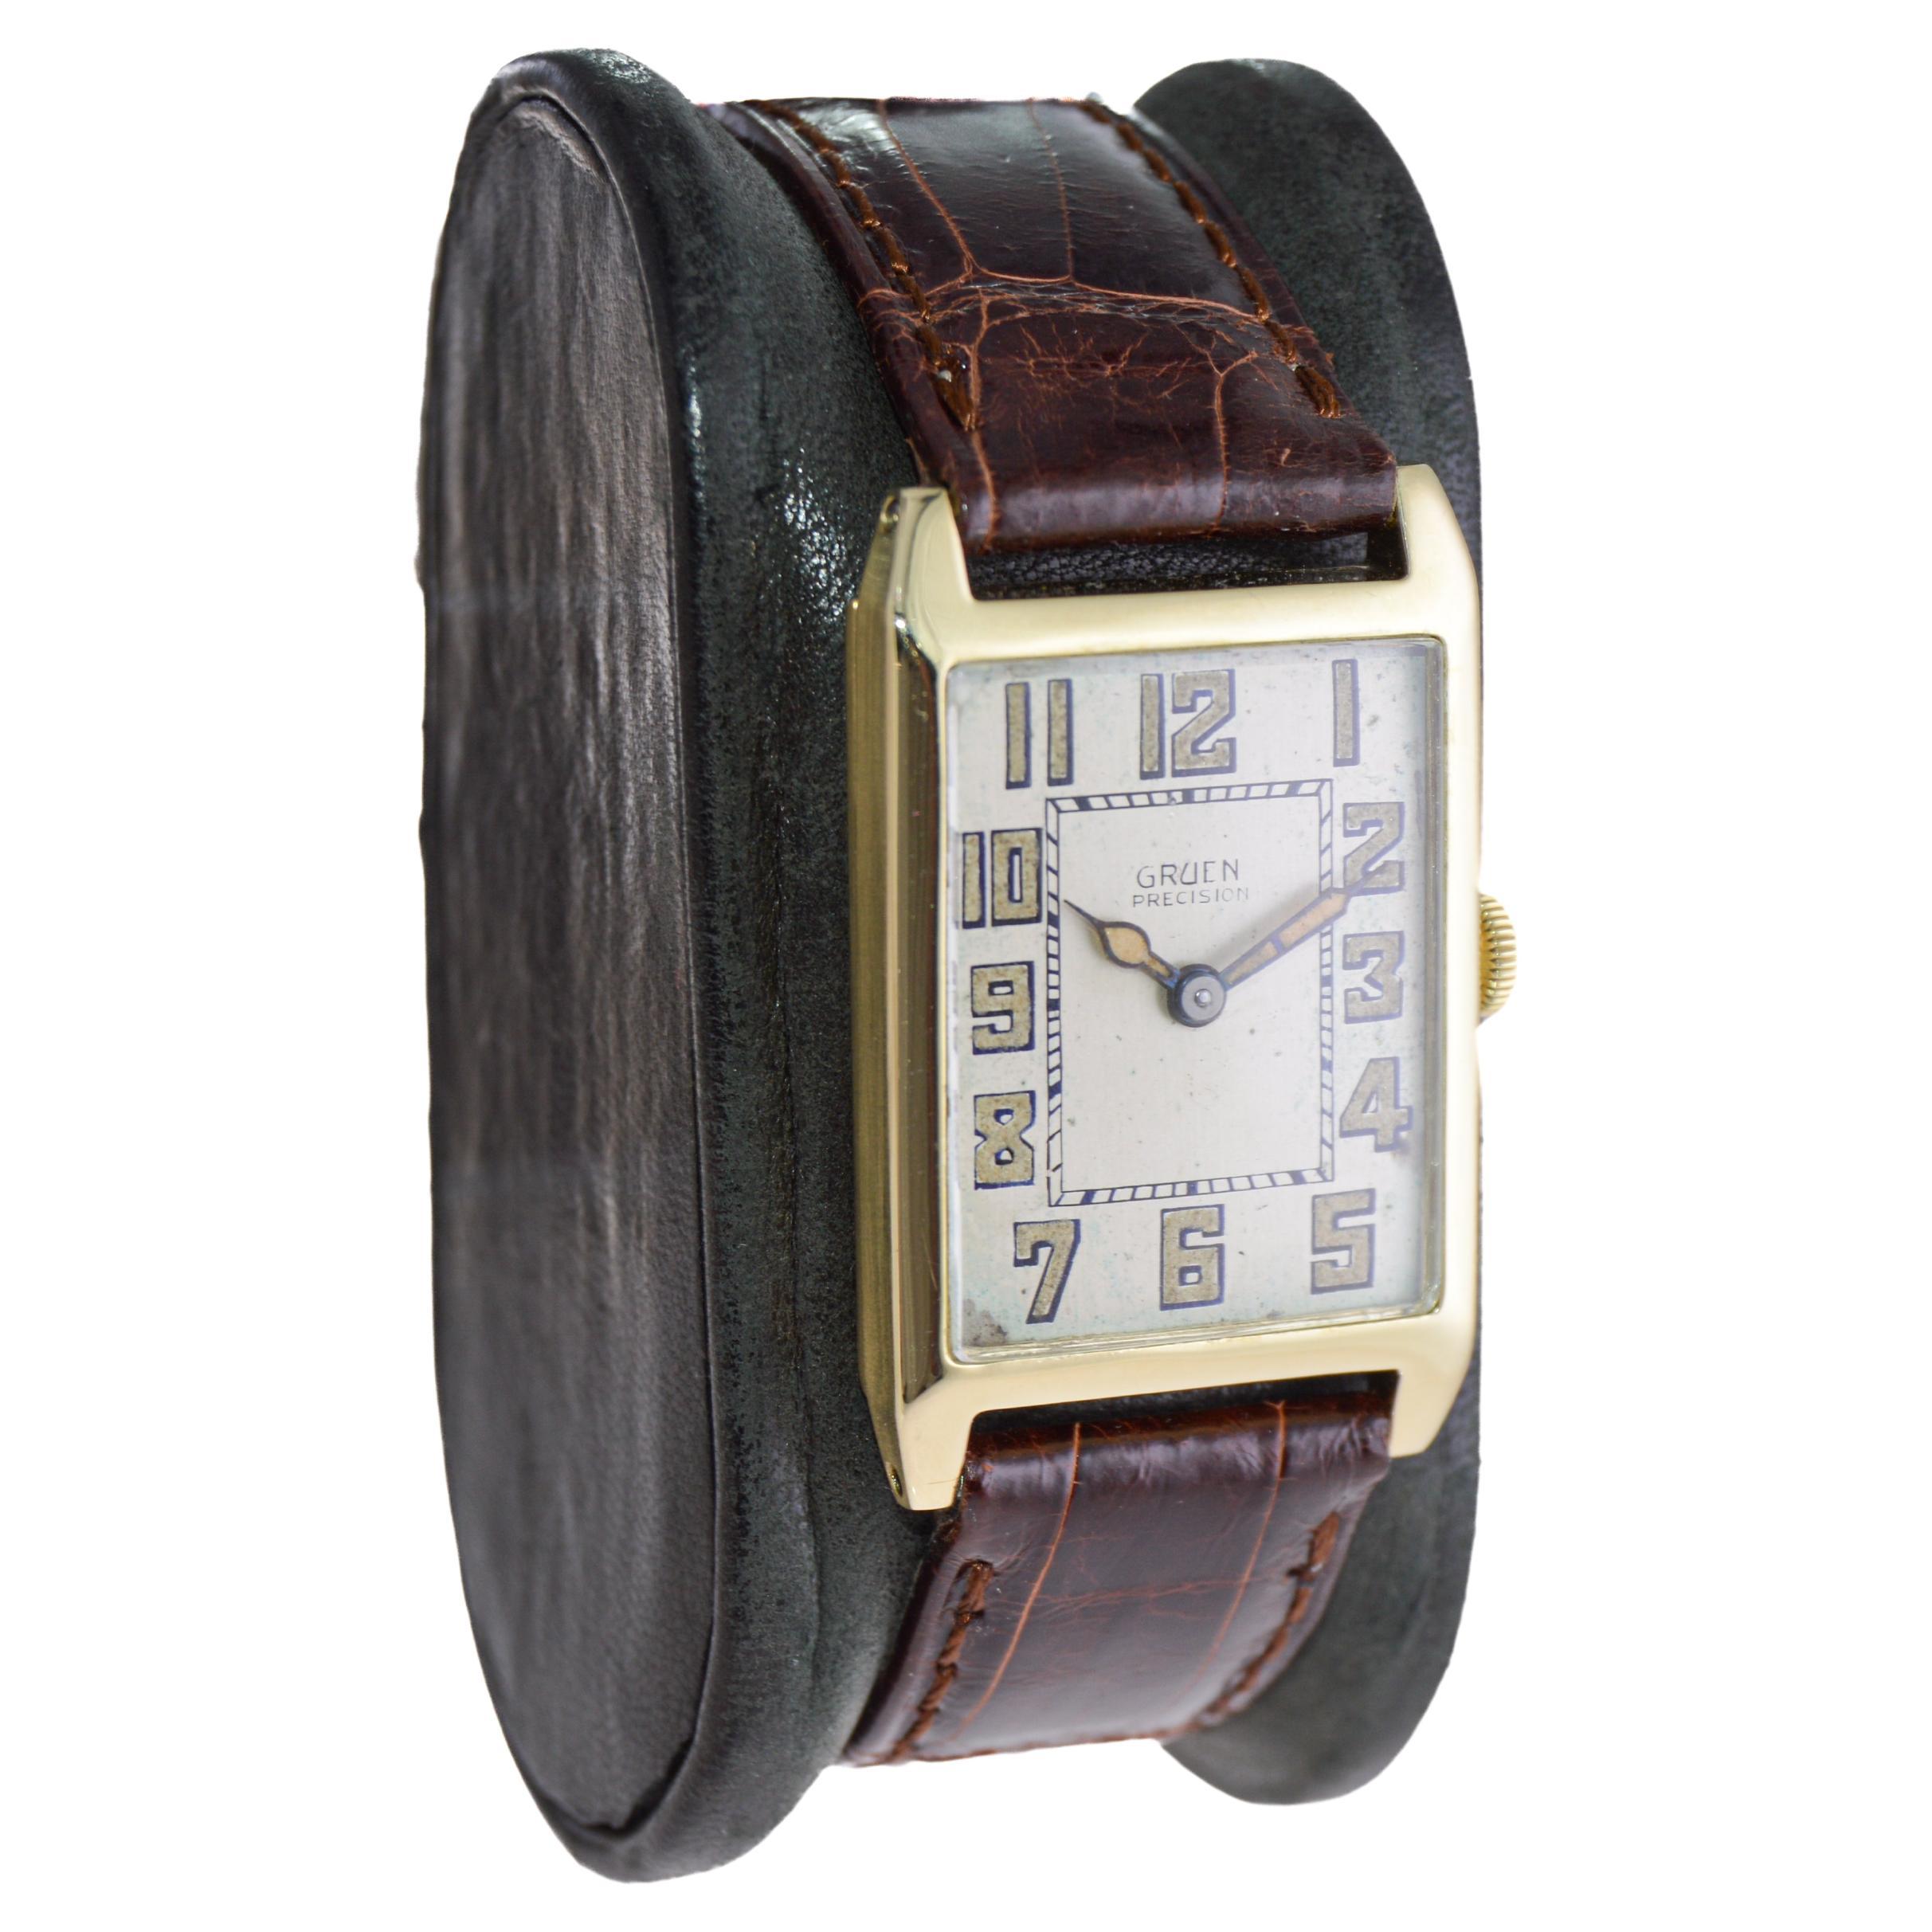 FACTORY / HOUSE: Gruen Watch Company
STYLE / REFERENCE: Art Deco / Tank Style
METAL / MATERIAL: 14Kt. Solid Gold 
CIRCA / YEAR: 1930
DIMENSIONS / SIZE: Length 37mm X Width 23mm
MOVEMENT / CALIBER: Manual Winding / 17 Jewels / Caliber 98
DIAL /